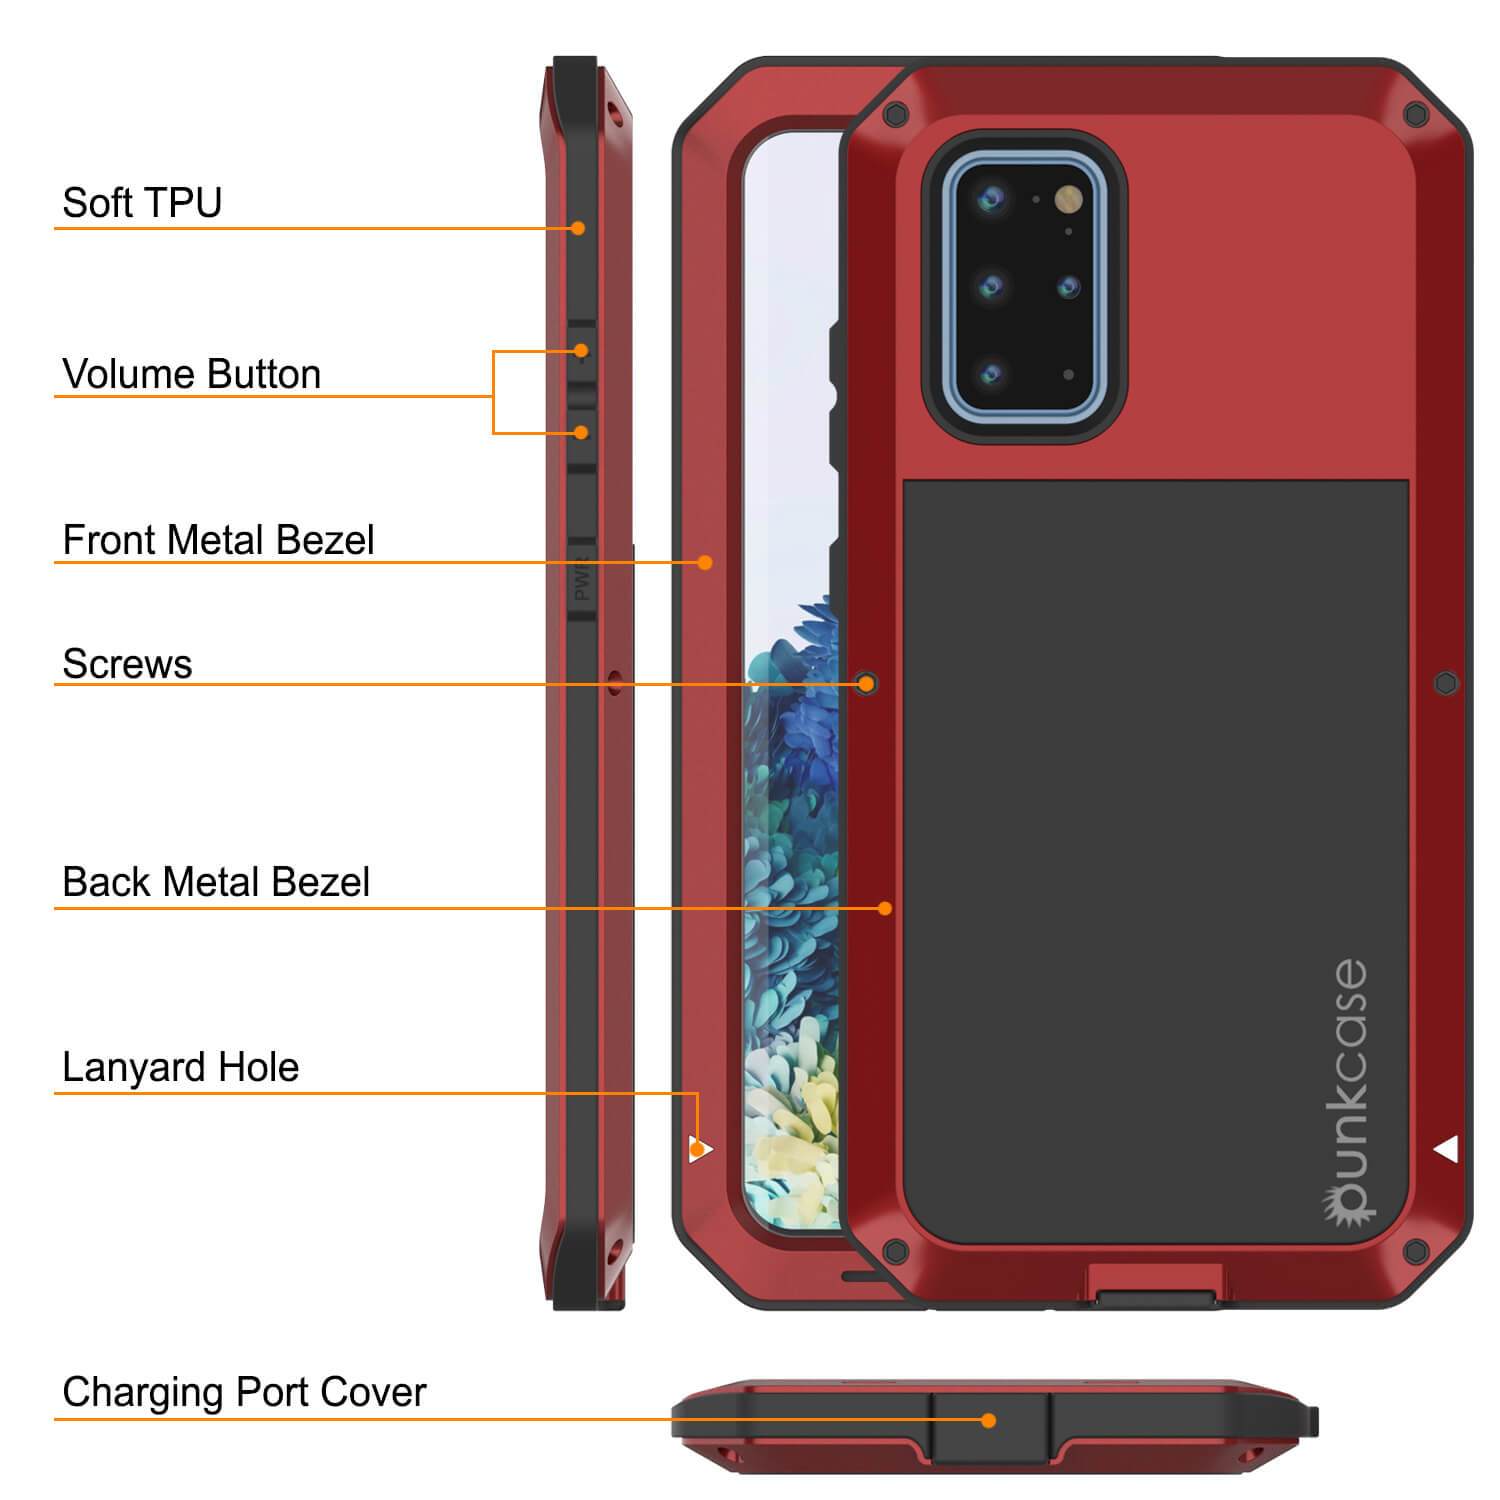 Galaxy s20+ Plus Metal Case, Heavy Duty Military Grade Rugged Armor Cover [Red]